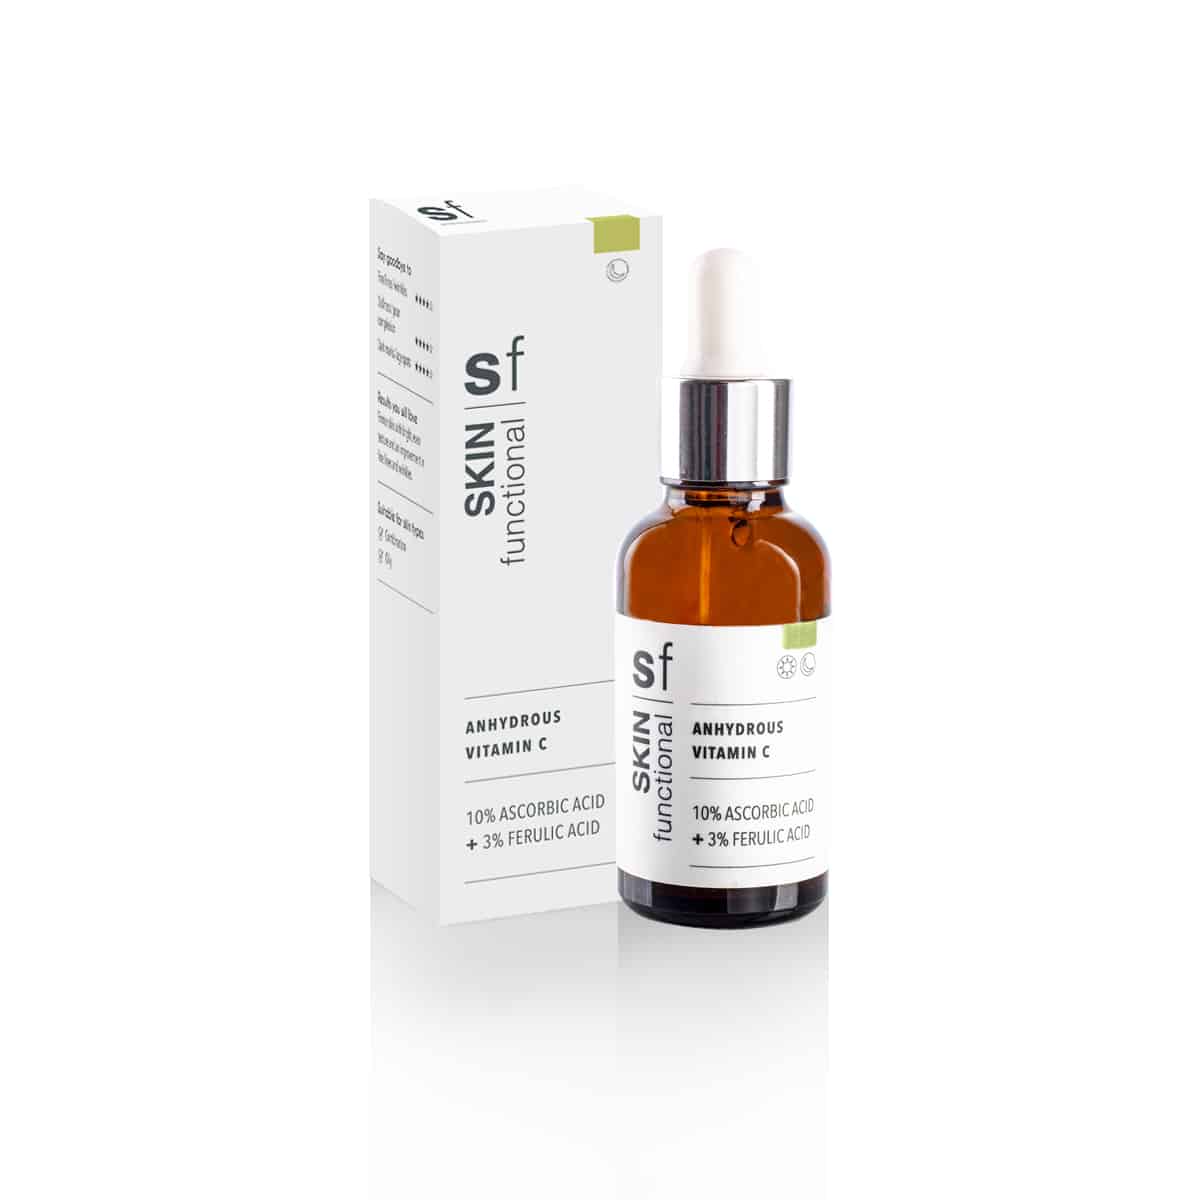 A bottle of SKIN Functional - 10% Ascorbic Acid + 3% Ferulic Acid - Anhydrous Vitamin C (Antioxidant Complexion Firmer) on a white background.